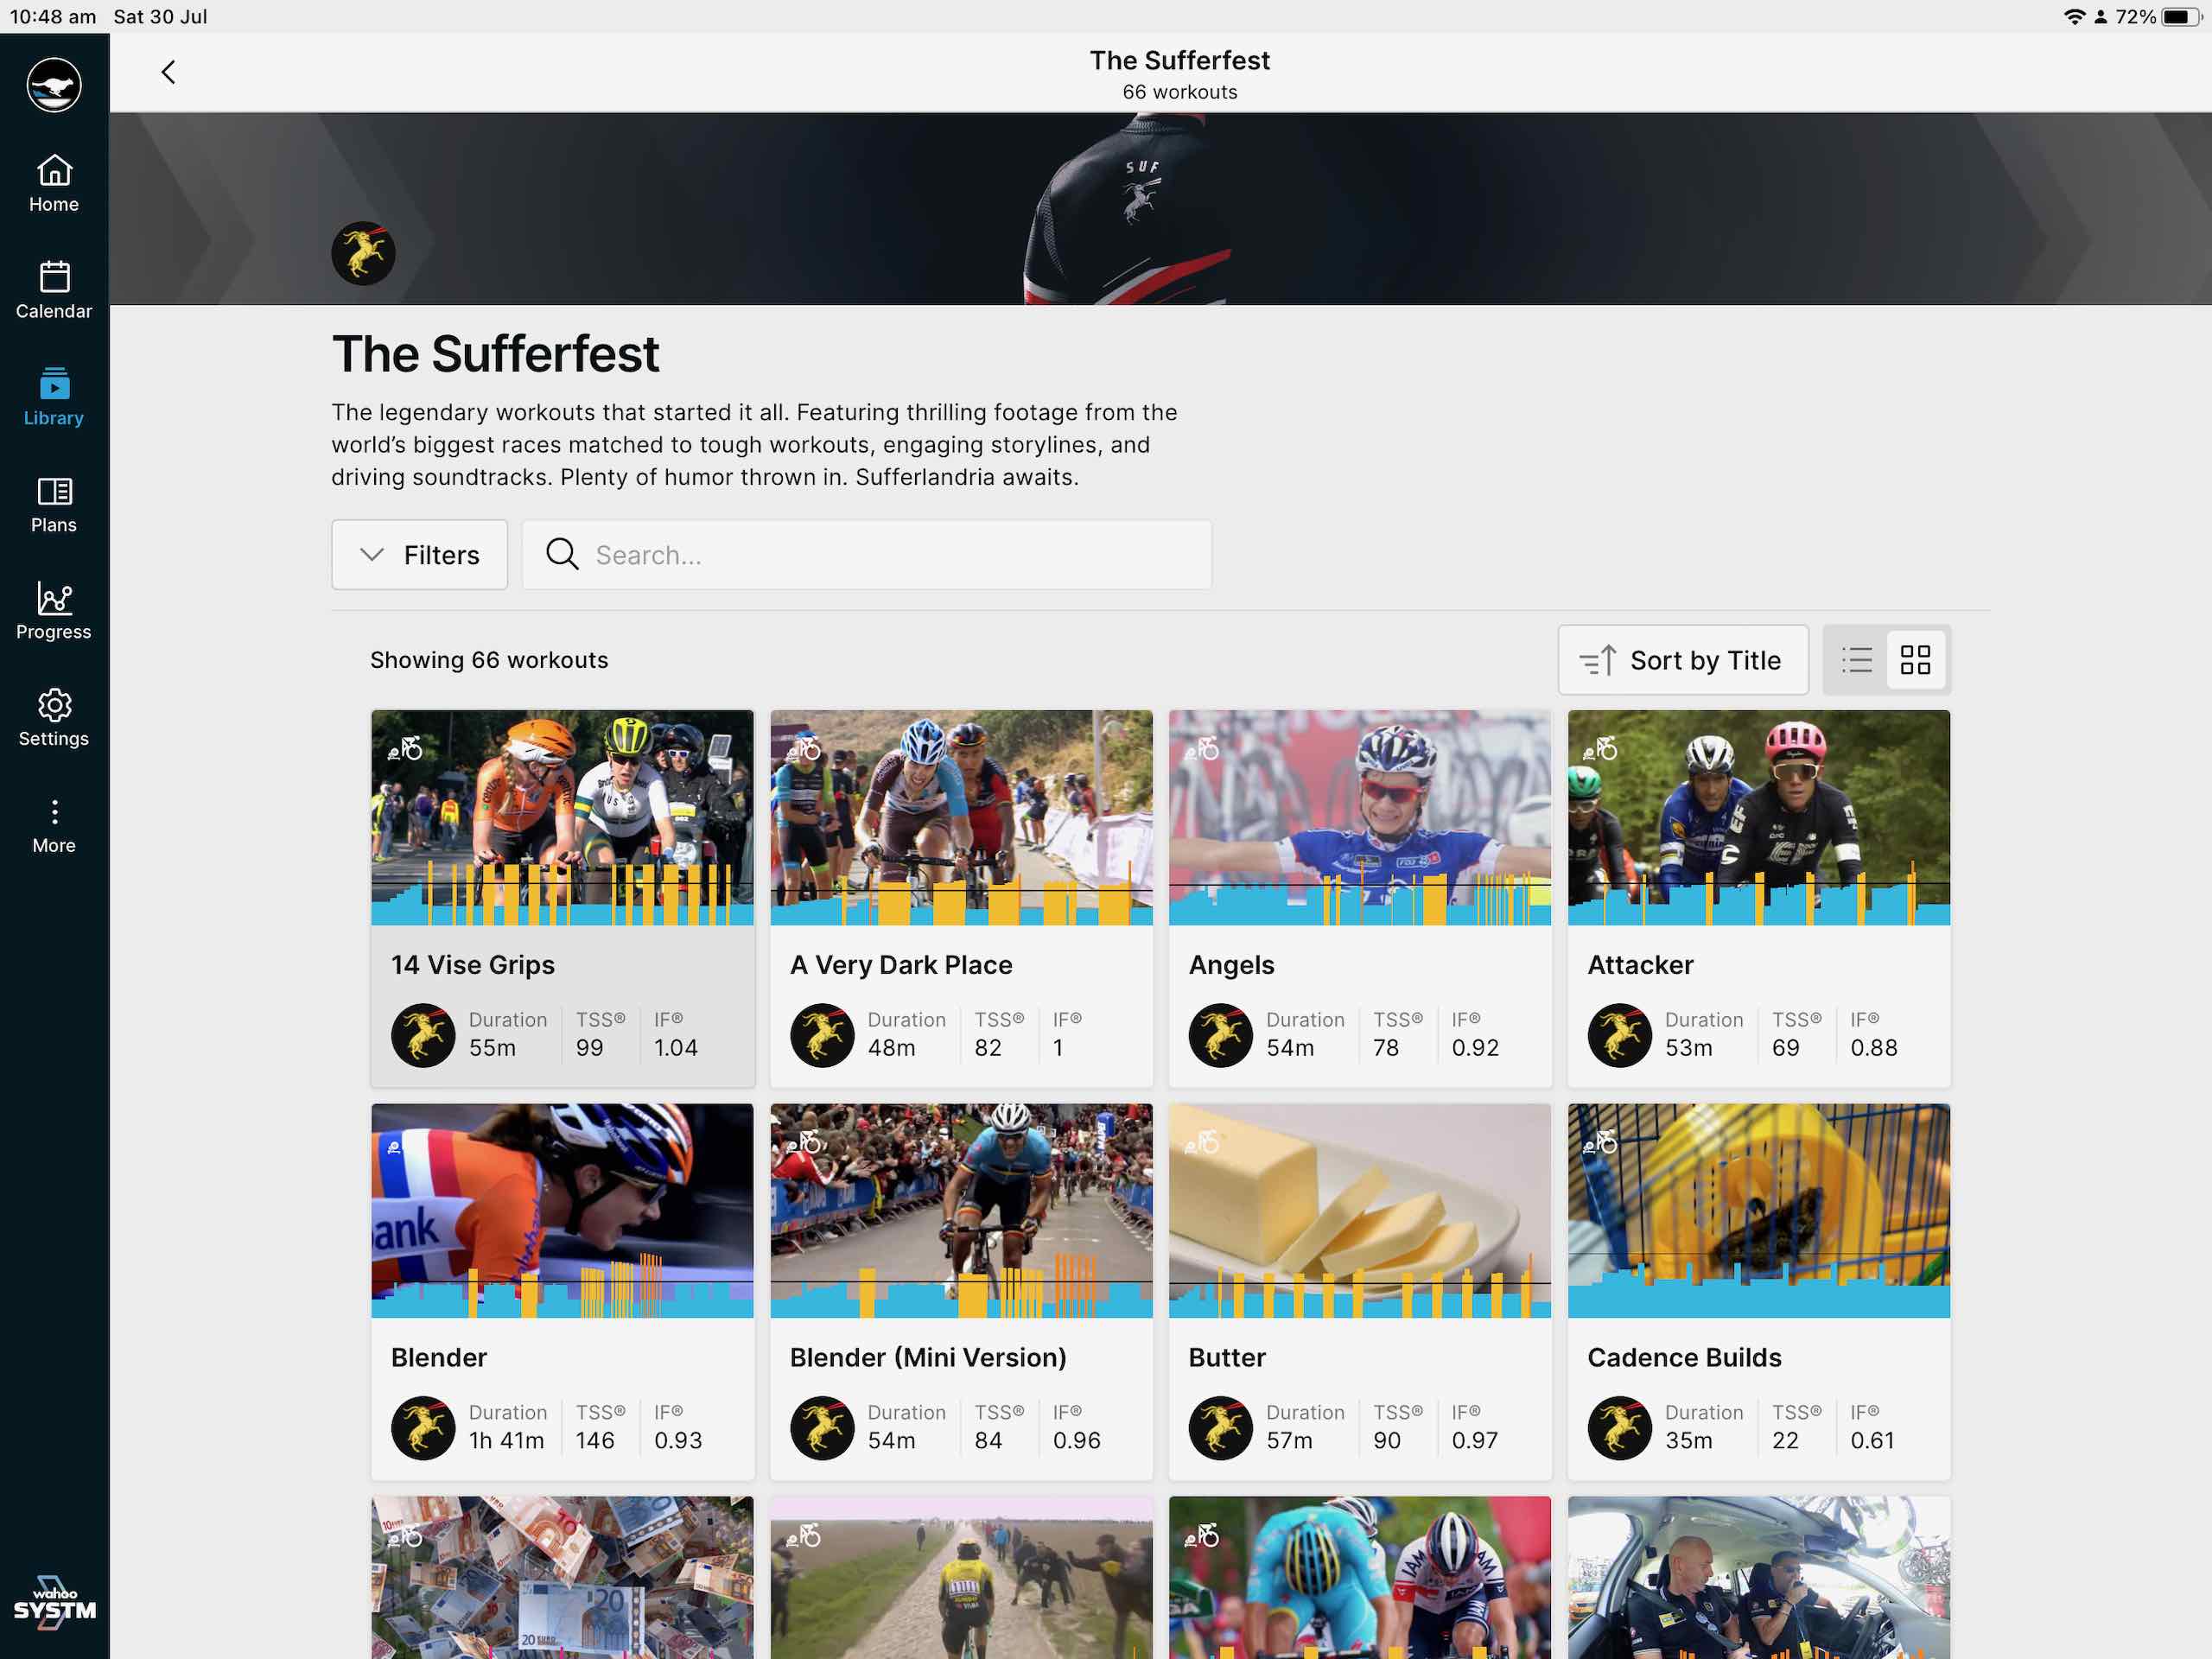 Completed the Sufferfest featured image